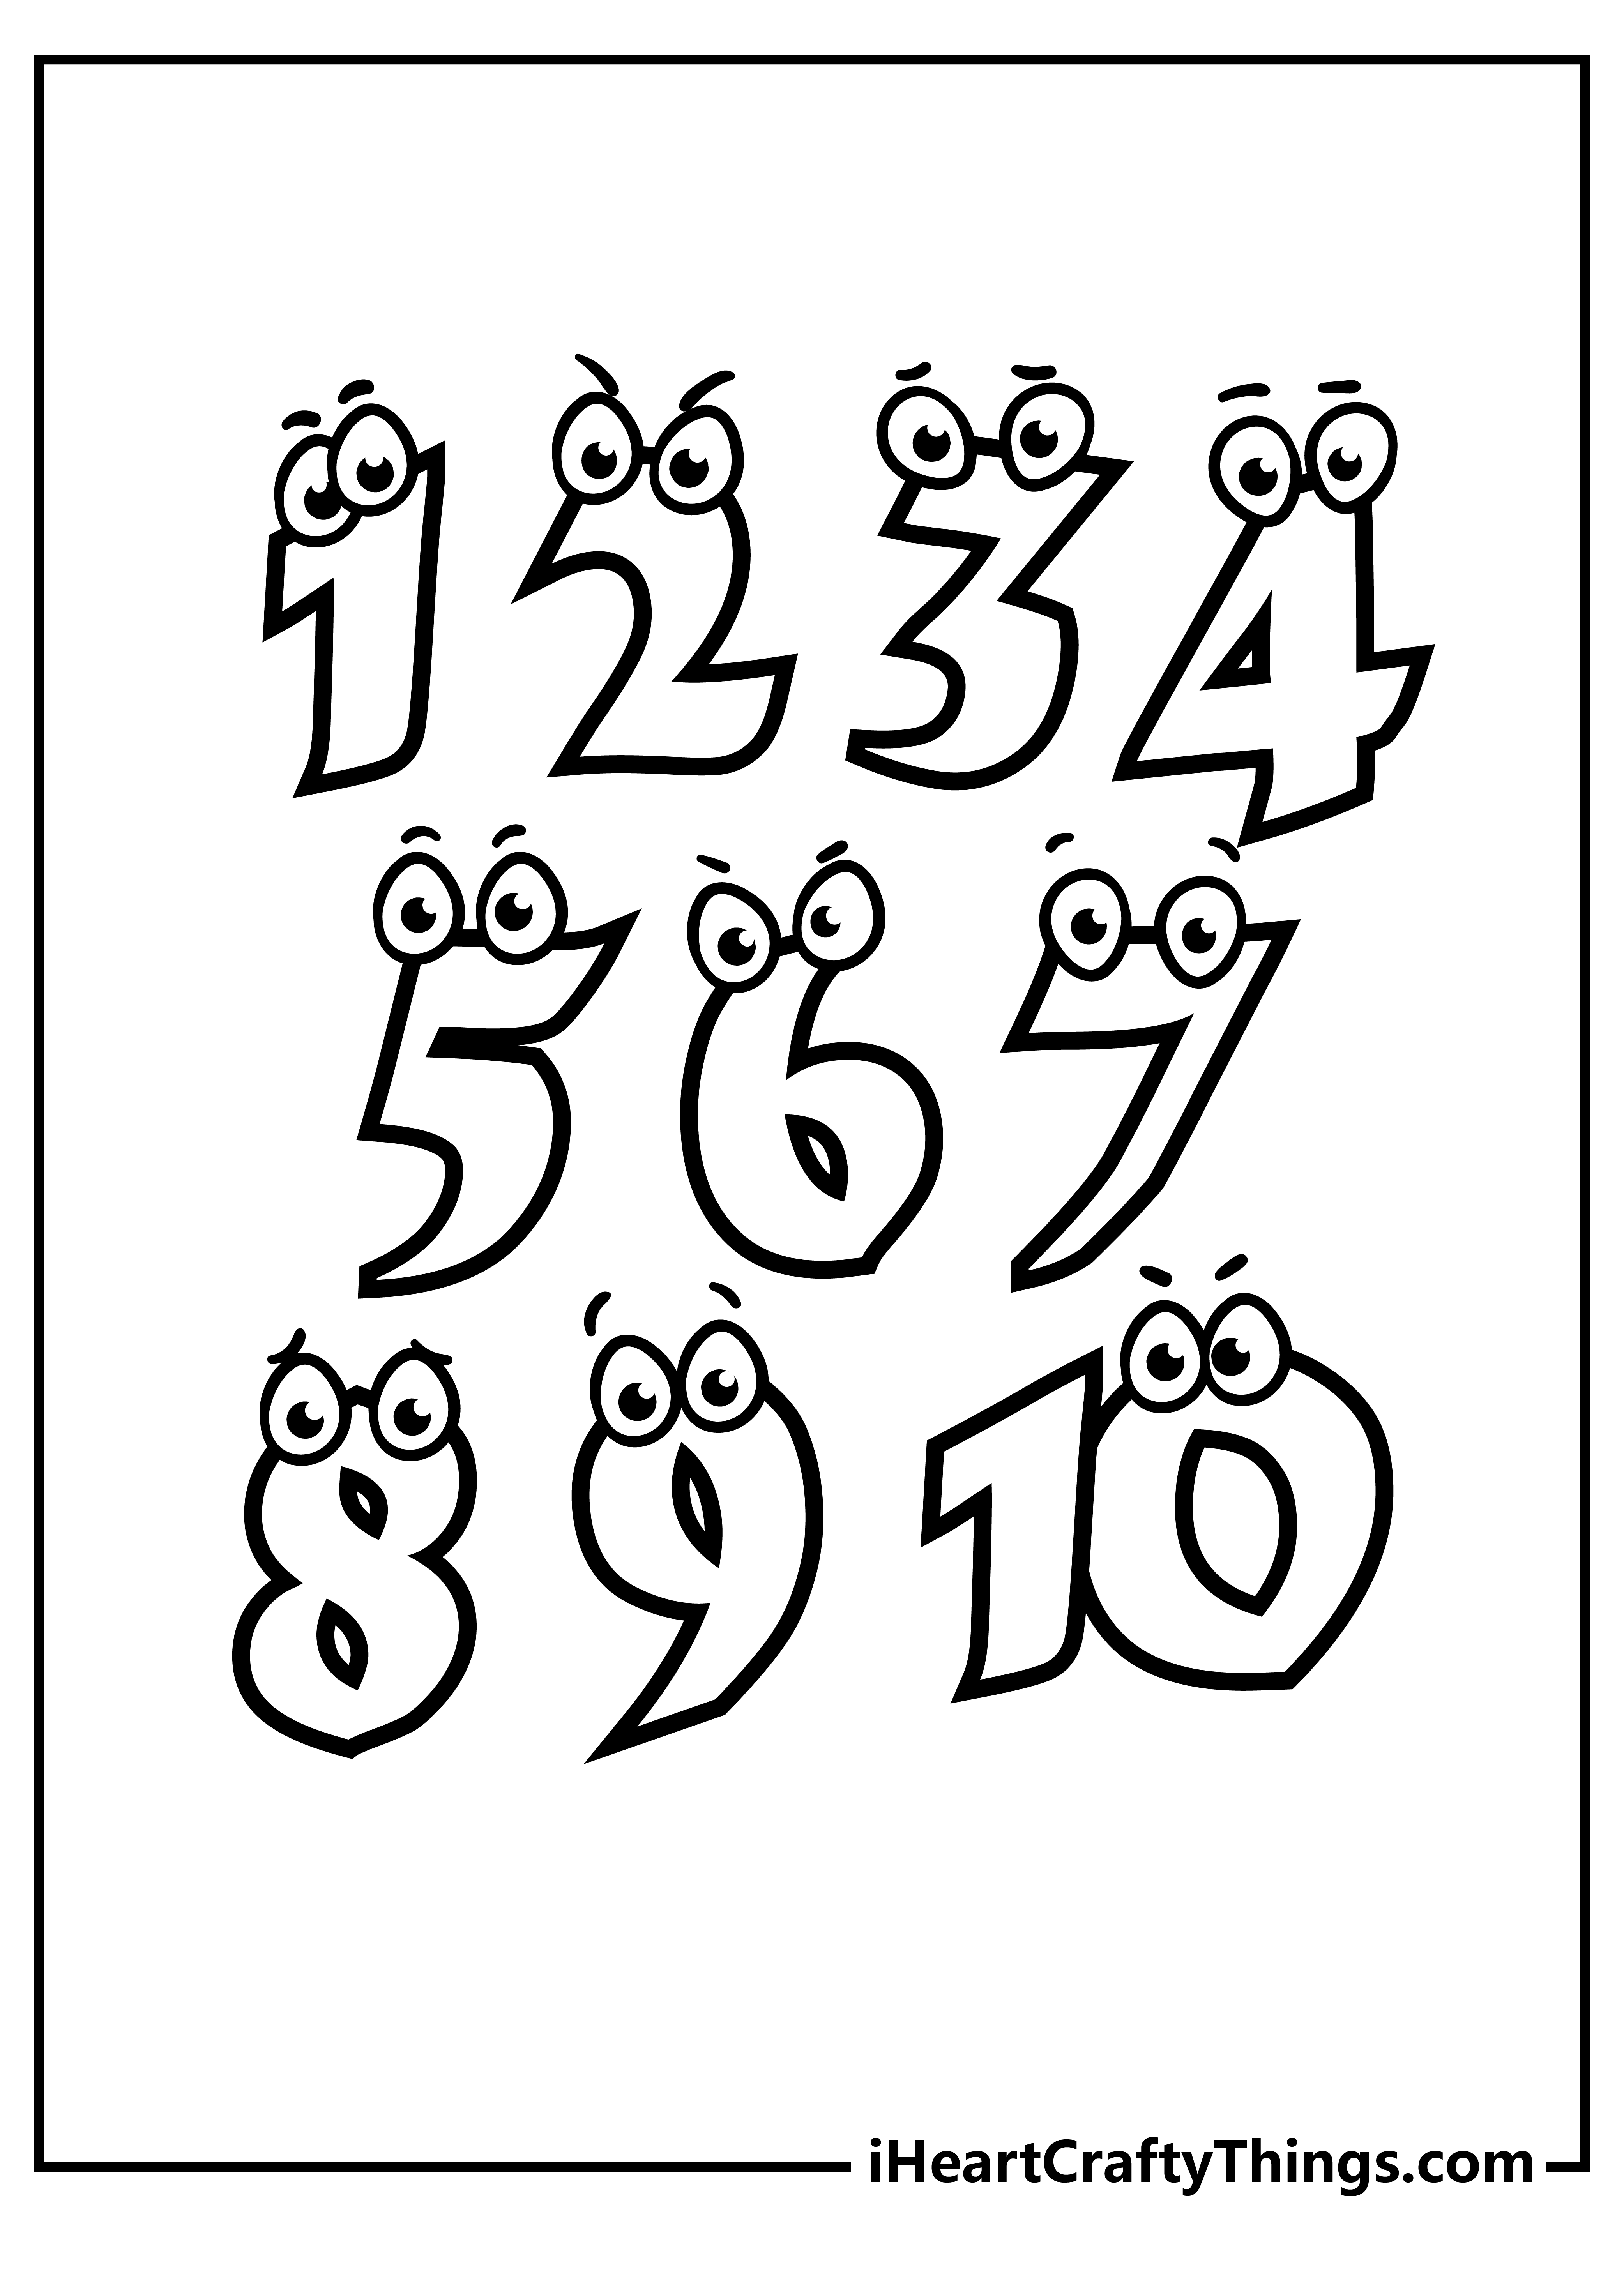 Number Coloring Pages for kids free download